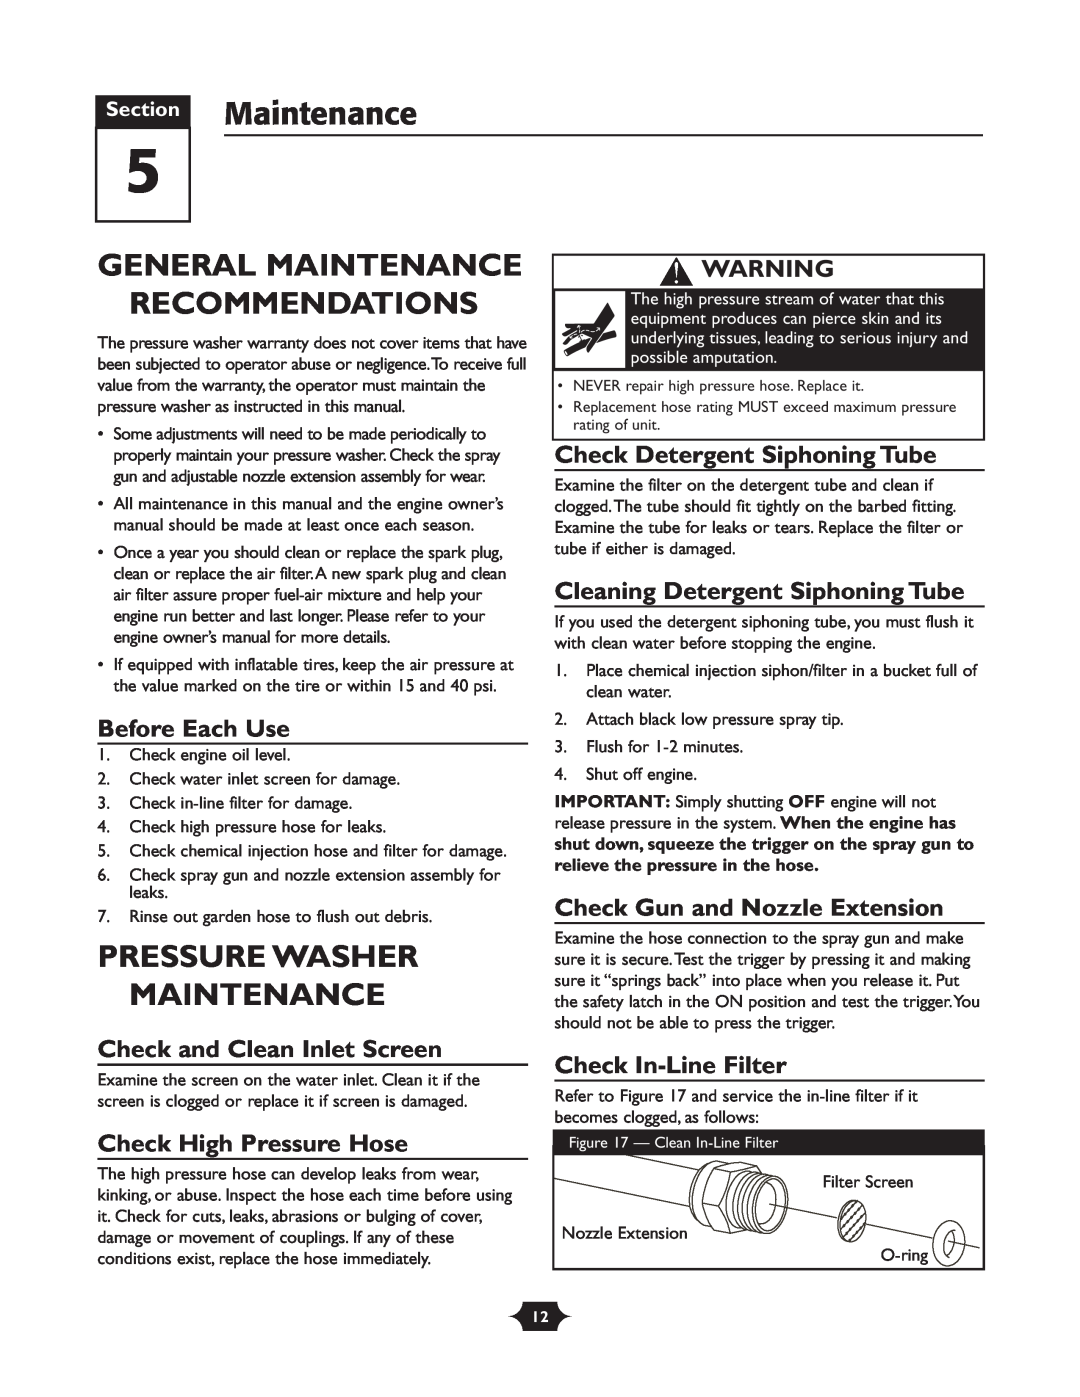 Briggs & Stratton 1903 owner manual Section Maintenance, General Maintenance Recommendations, Pressure Washer Maintenance 